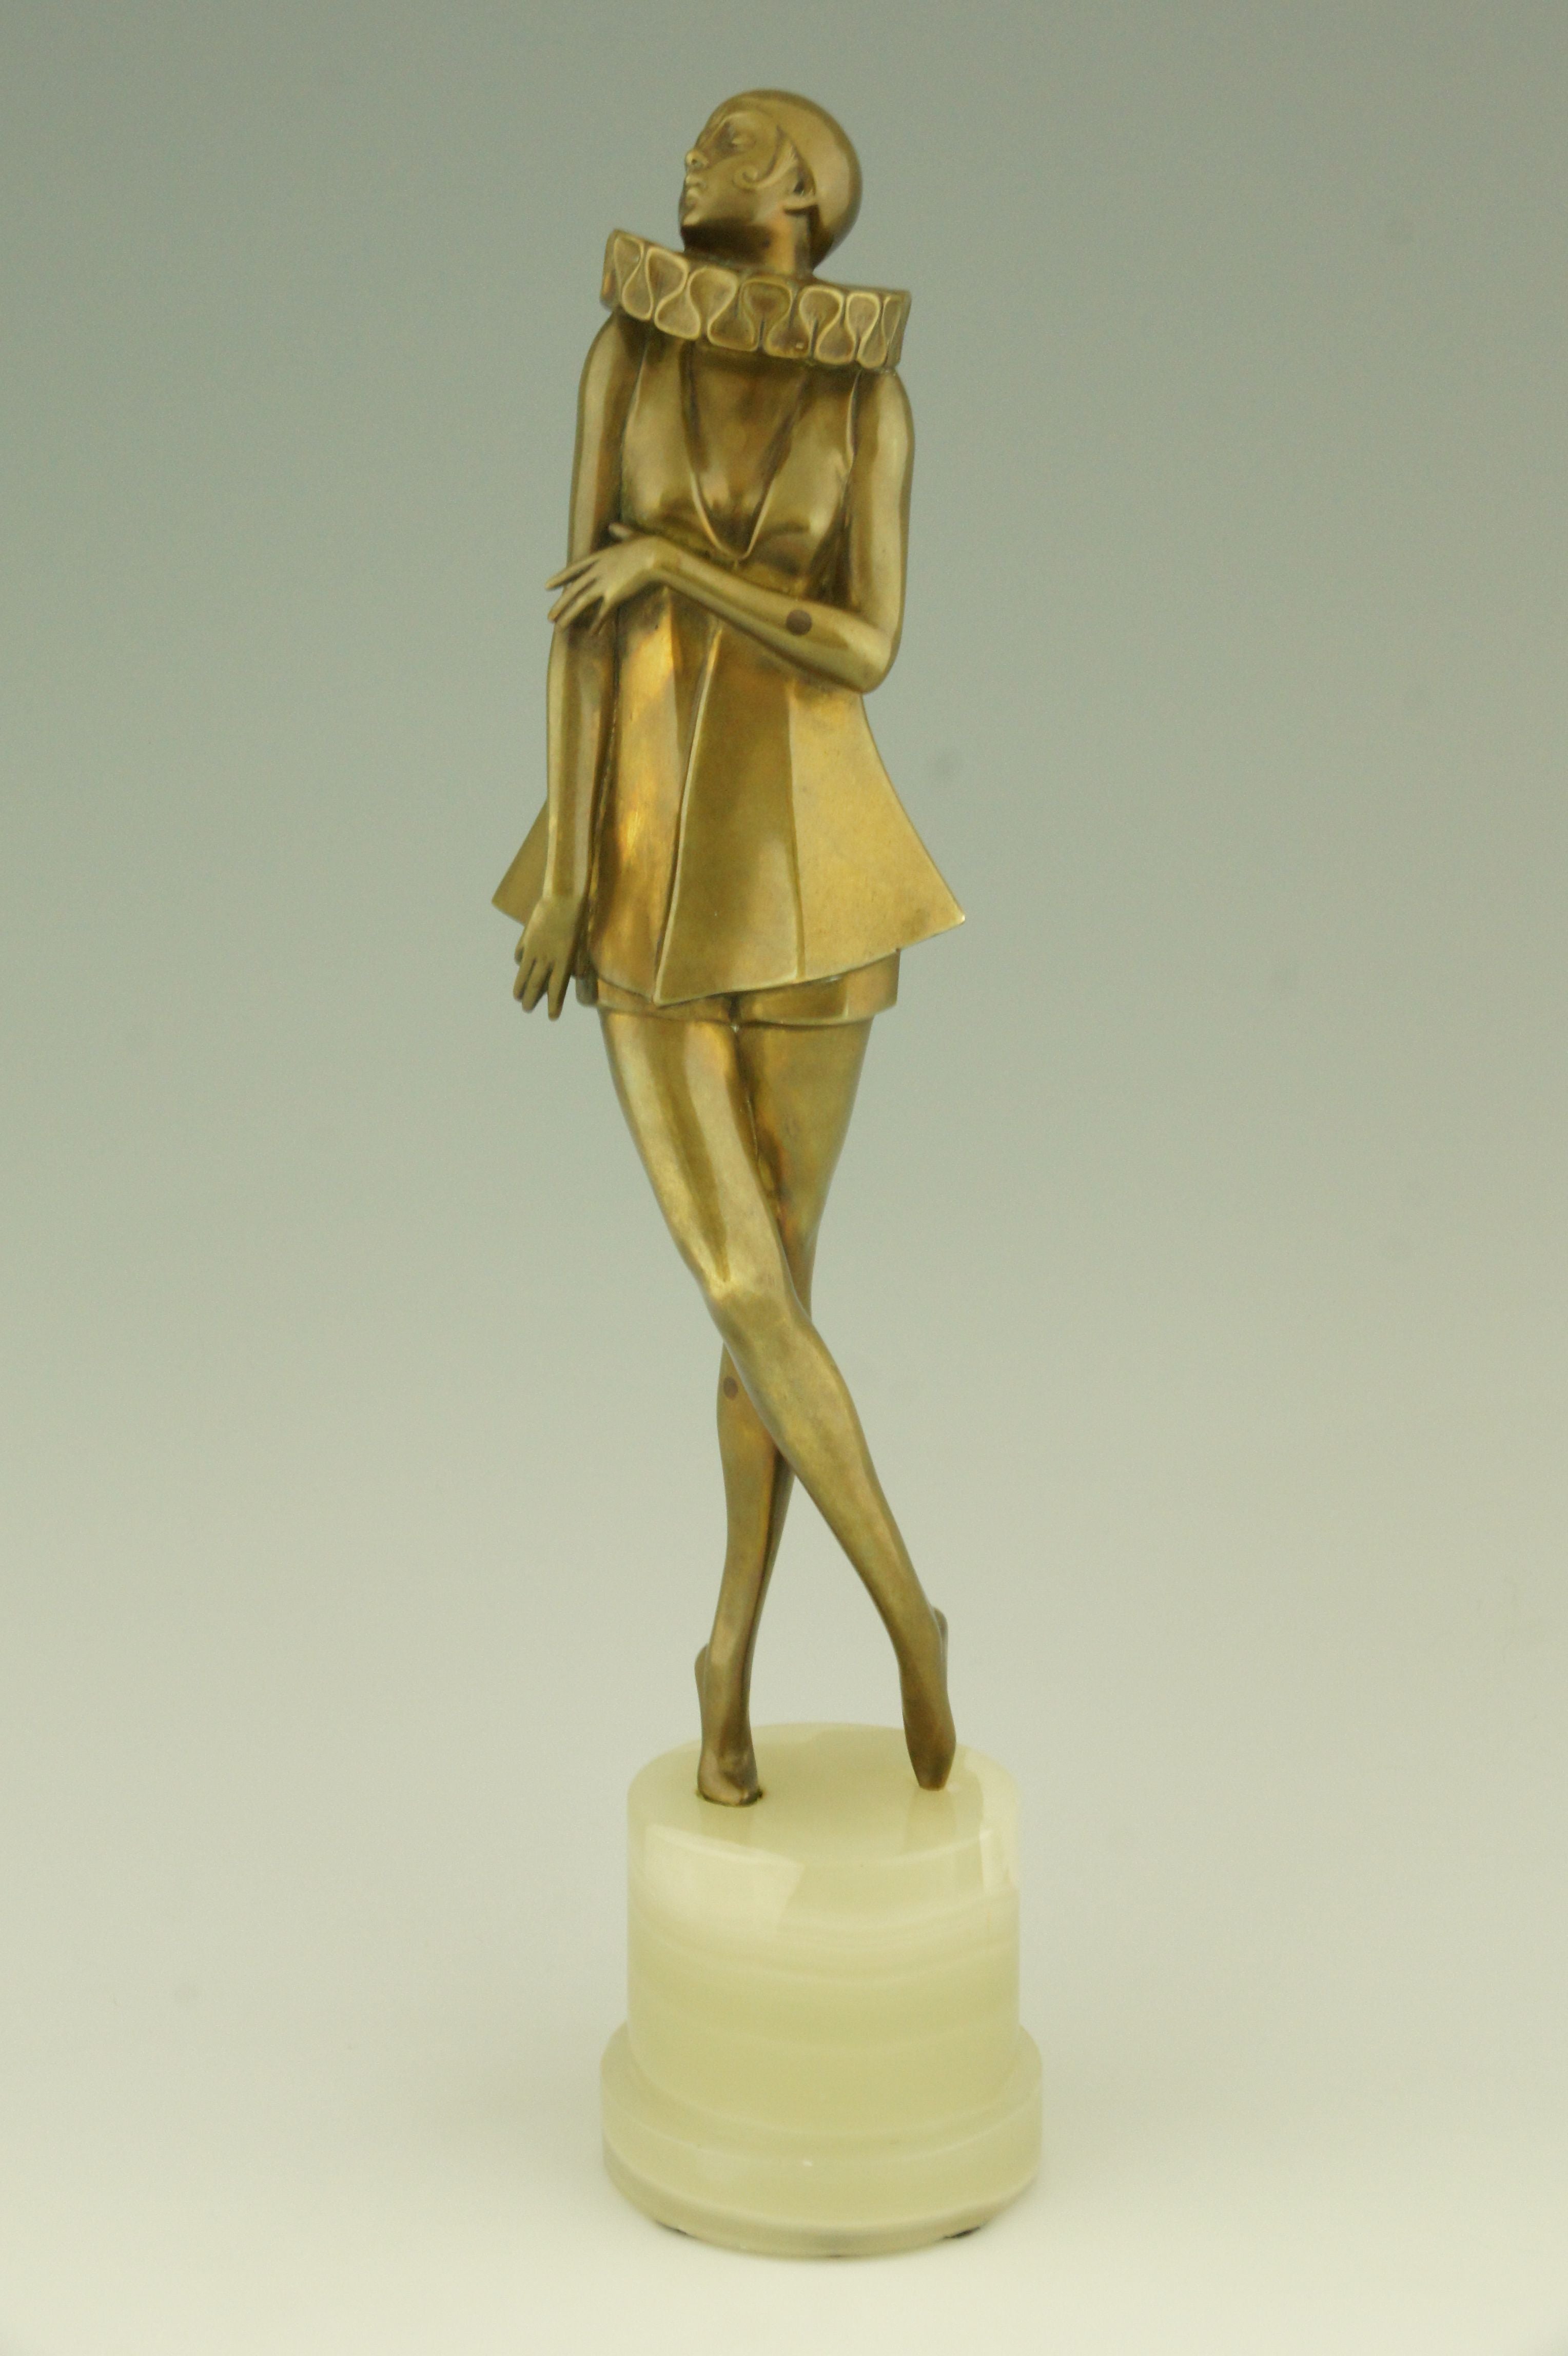 Art Deco bronze sculpture of a woman with stylized costume by Lorenzl. 